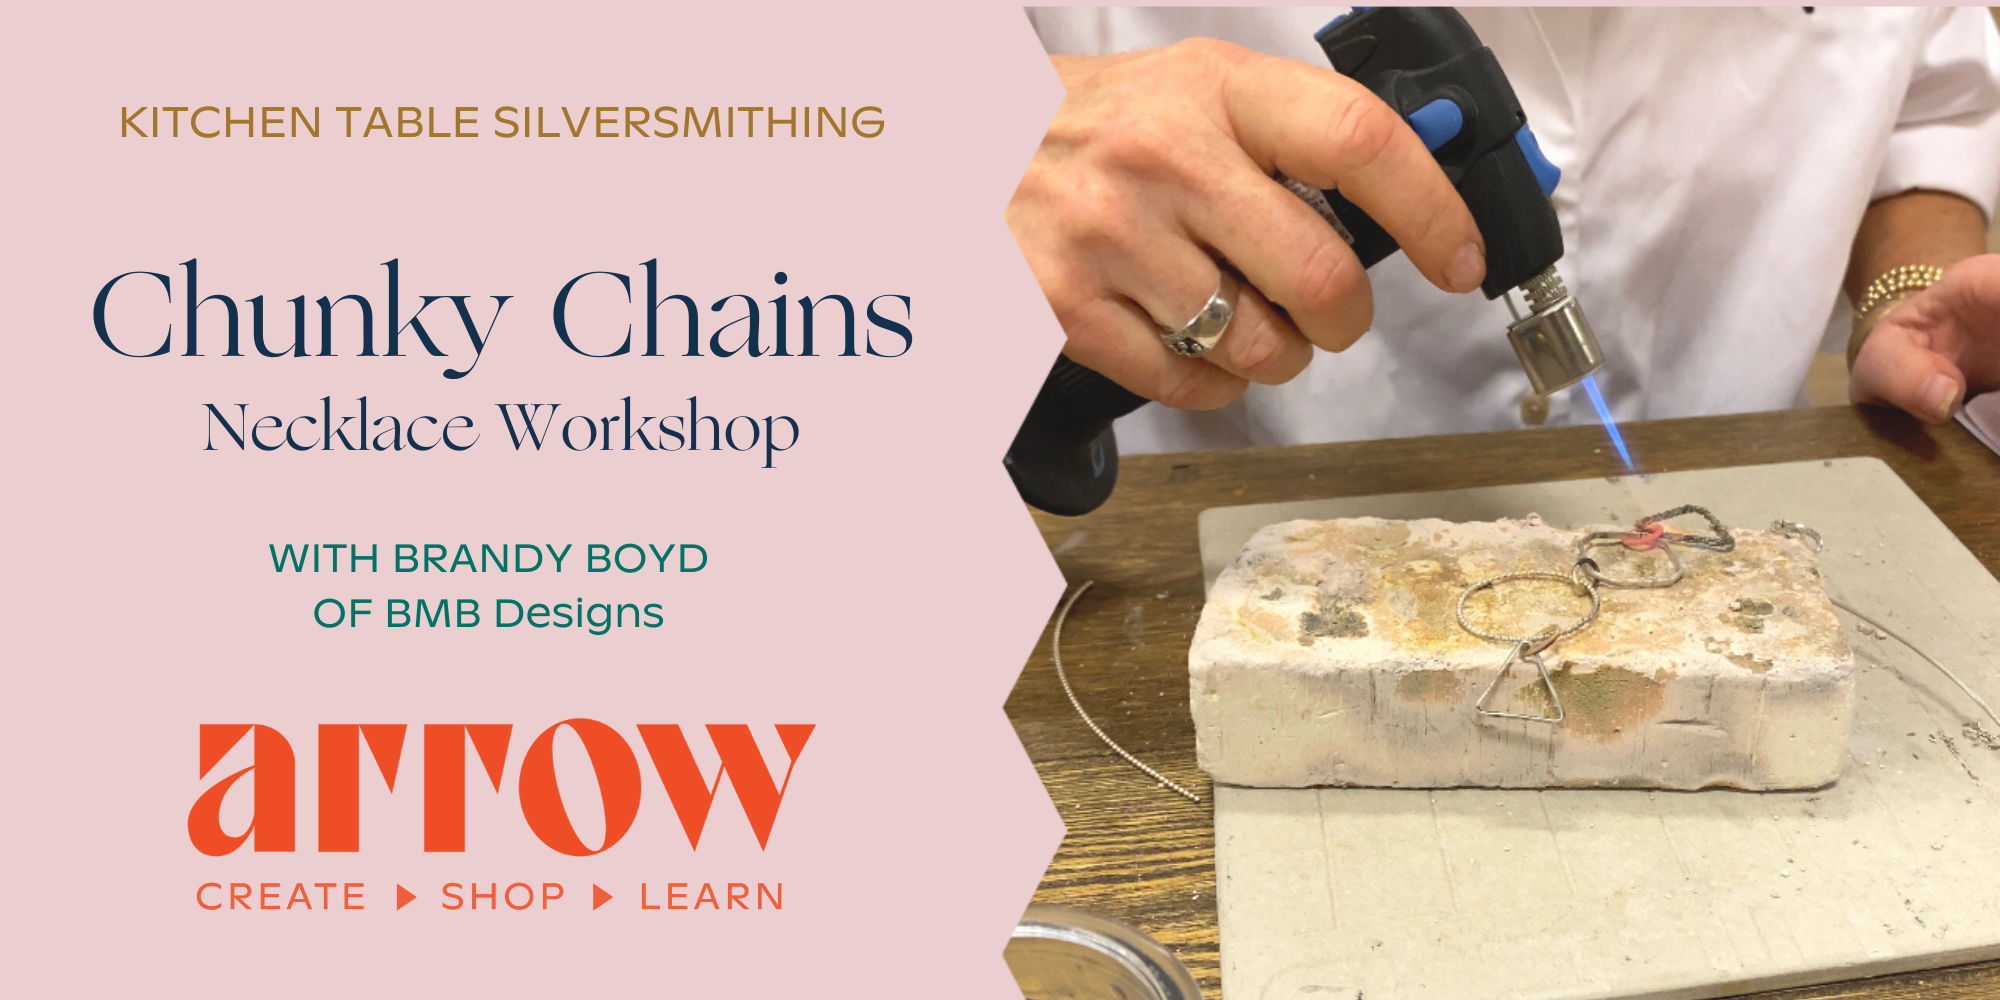 Kitchen Table Silversmithing: Chunky Chains Necklace Workshop promotional image